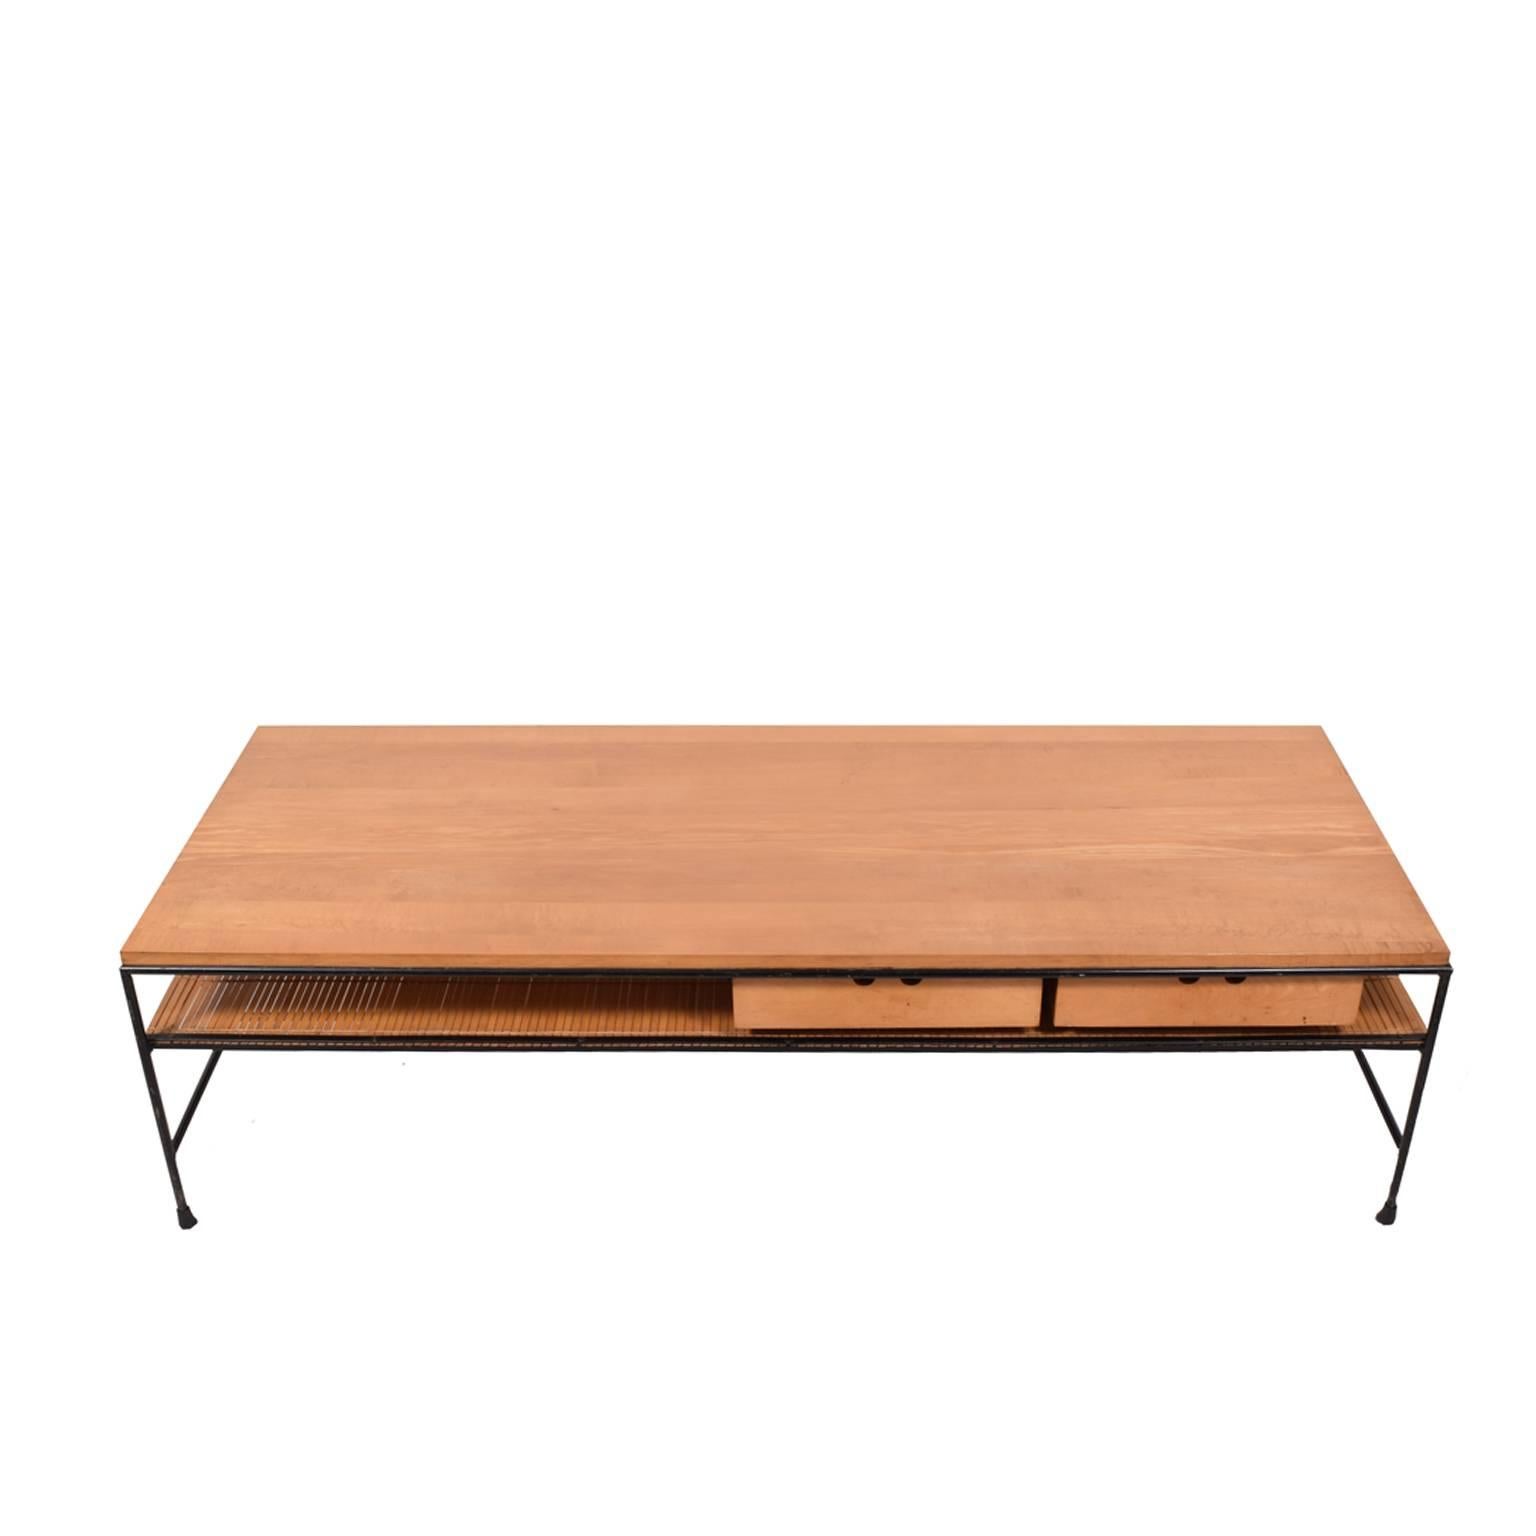 Maple top with two suspended drawers on solid black painted iron frame. Designed by Paul McCobb in the 1950s for Winchendon.